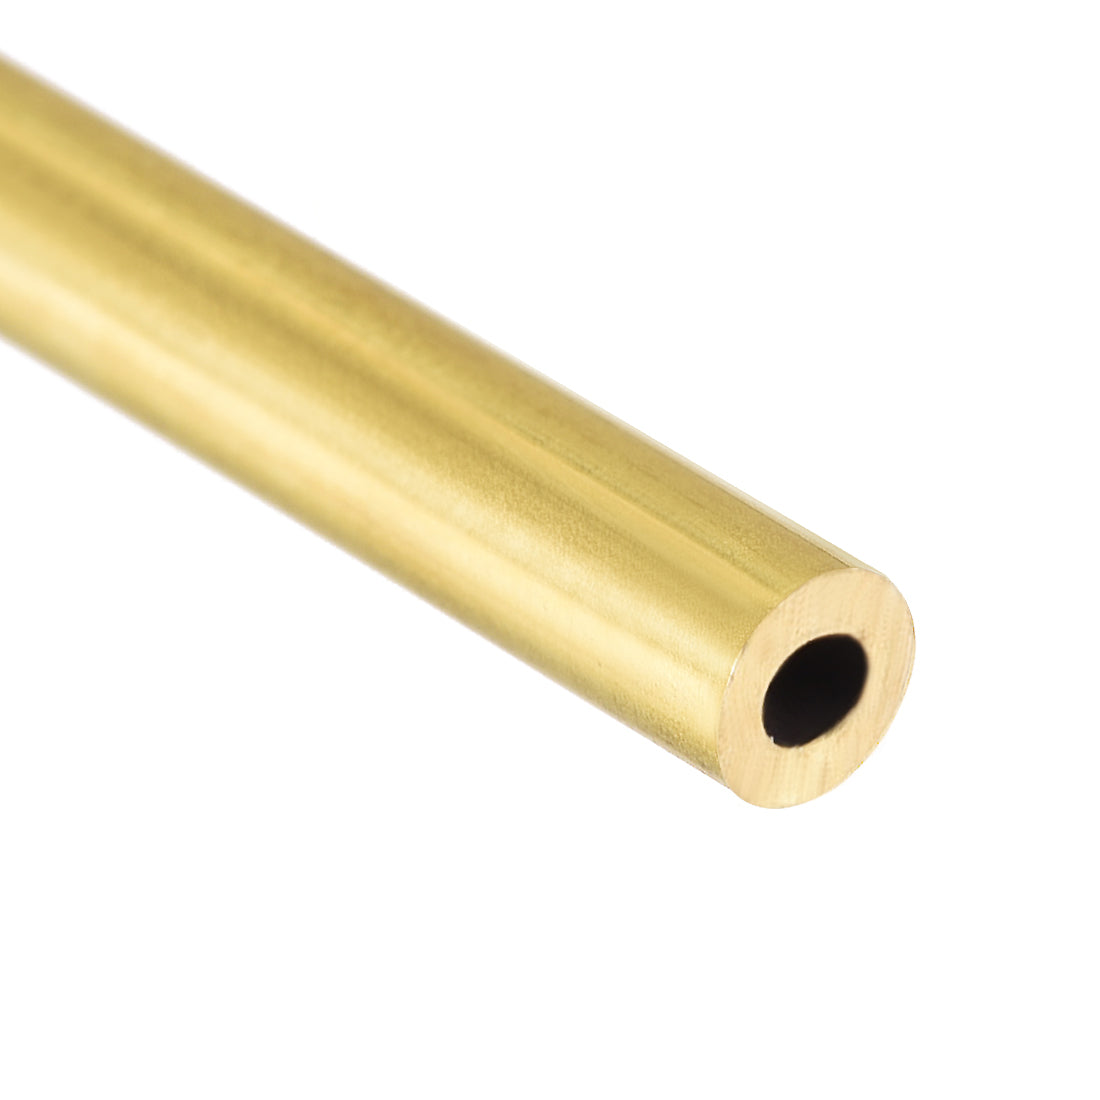 Uxcell Uxcell Brass Round Tube 300mm Length 9mm OD 1.5mm Wall Thickness Seamless Straight Pipe Tubing 2 Pcs